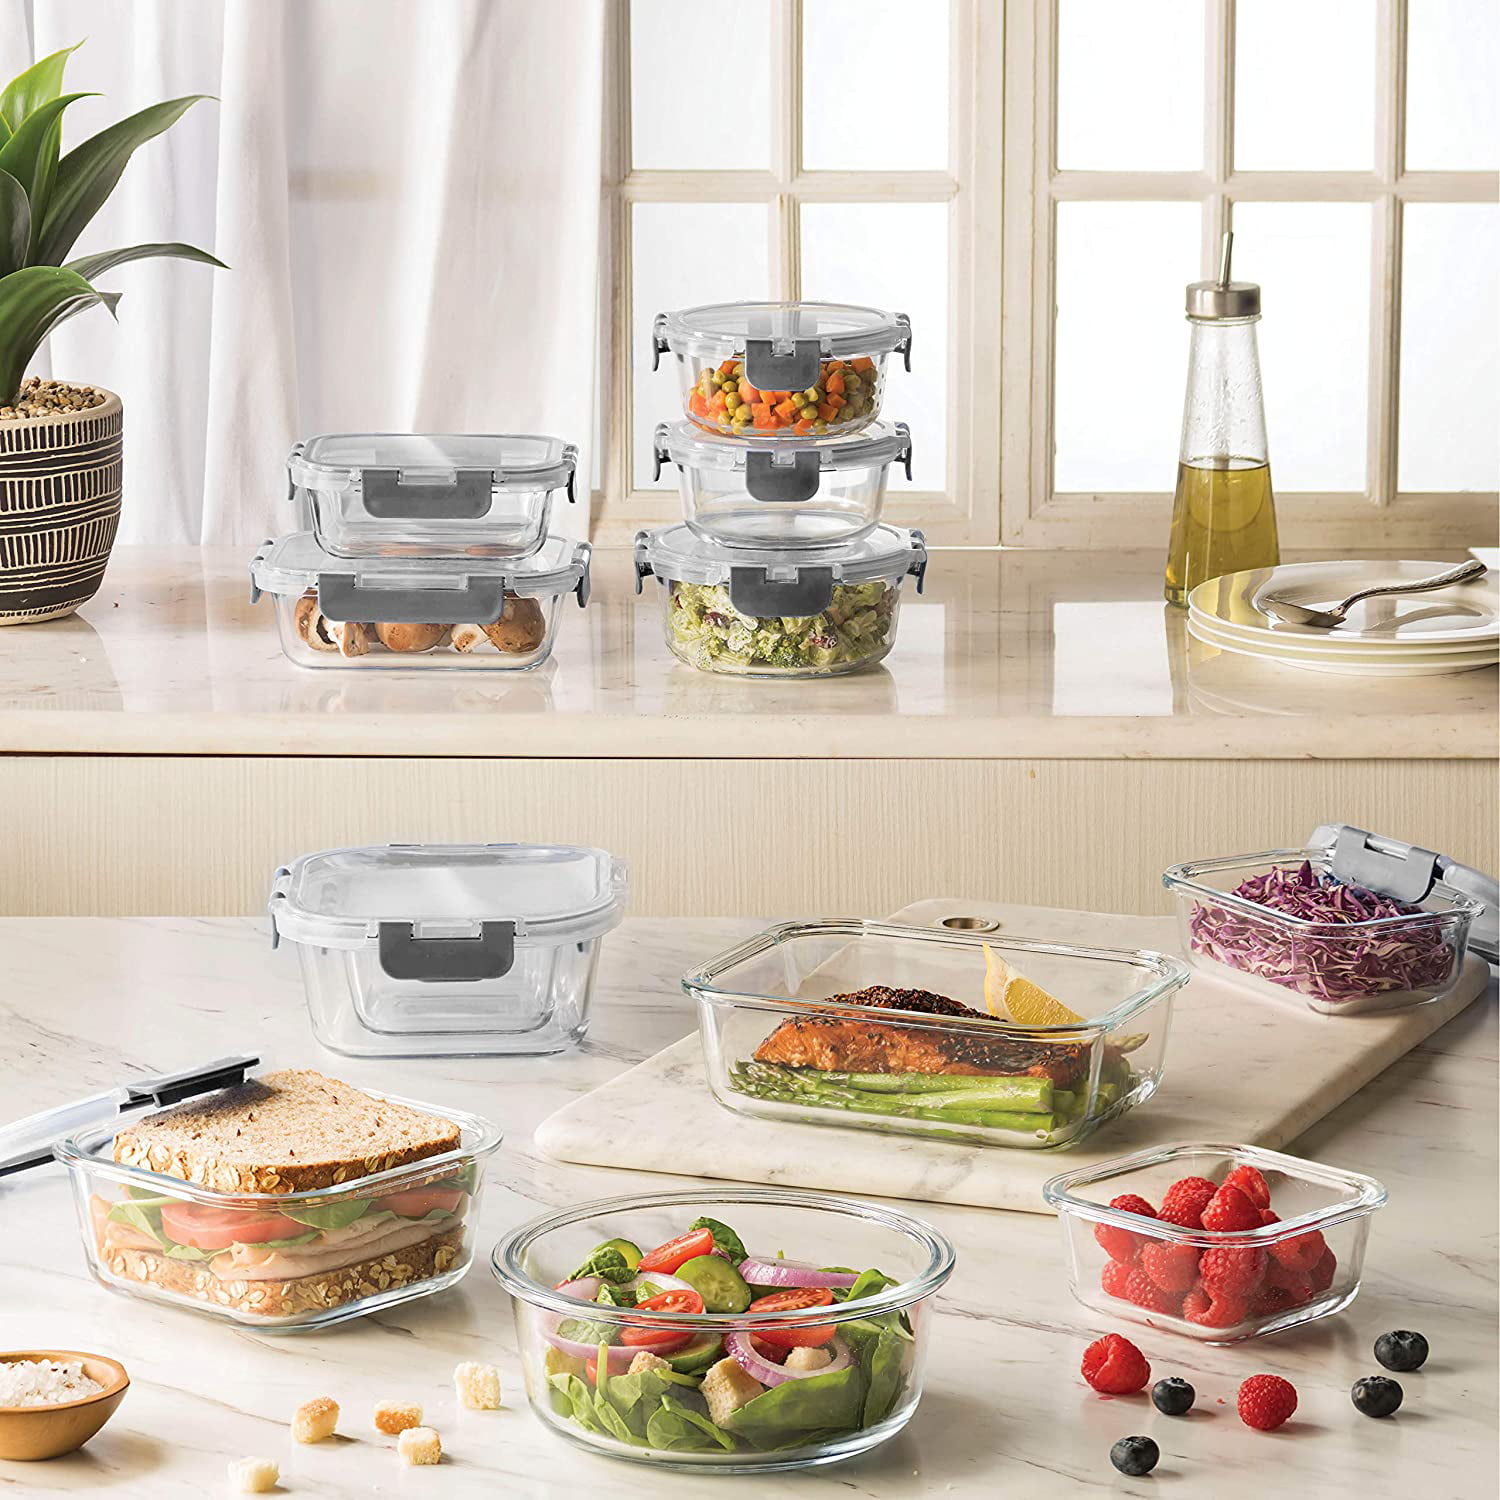 FineDine 12-Piece Superior Glass Food Storage Containers Set, 35oz Capacity  - Newly Innovated Hinged Locking lids - 100% Leakproof Glass Meal-Prep